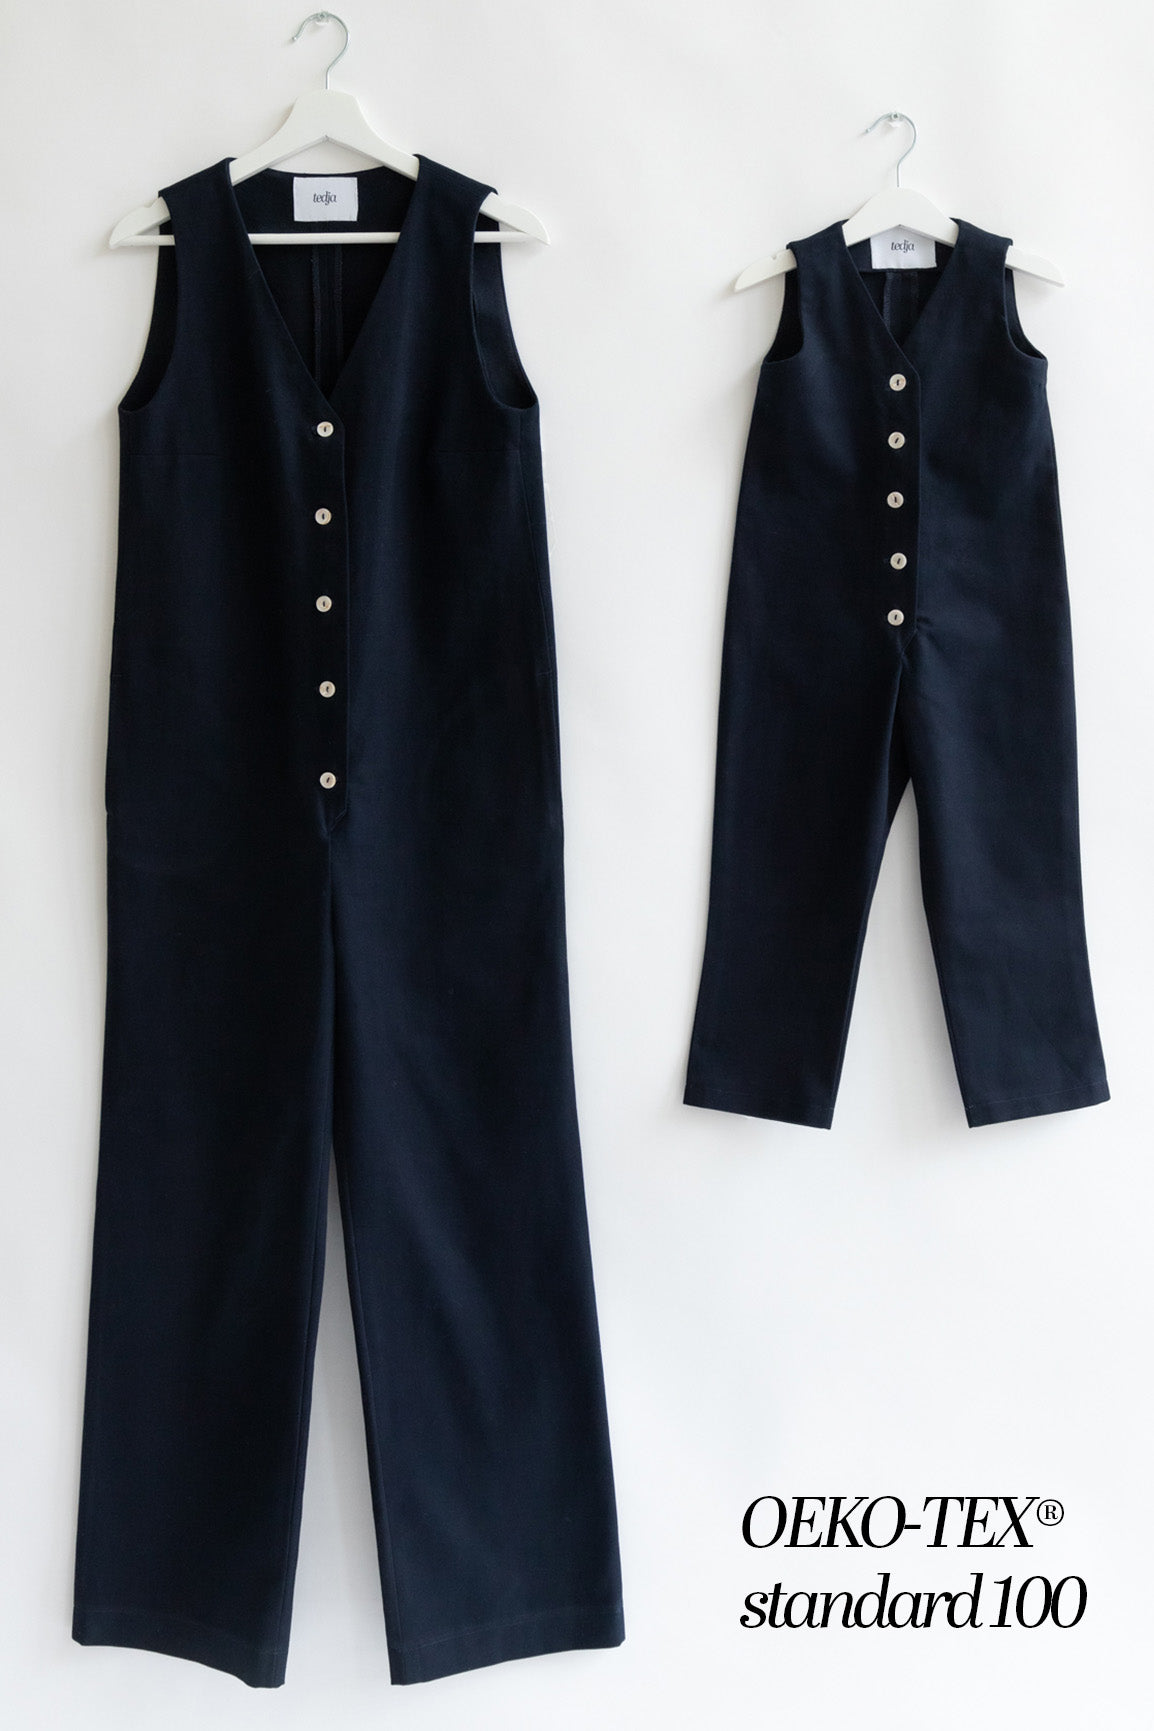 Navy dark blue color Kids Mini Jumpsuit overall workwear cotton canvas 5 buttons v-neck OEKO-TEX sustainable clothes handmade